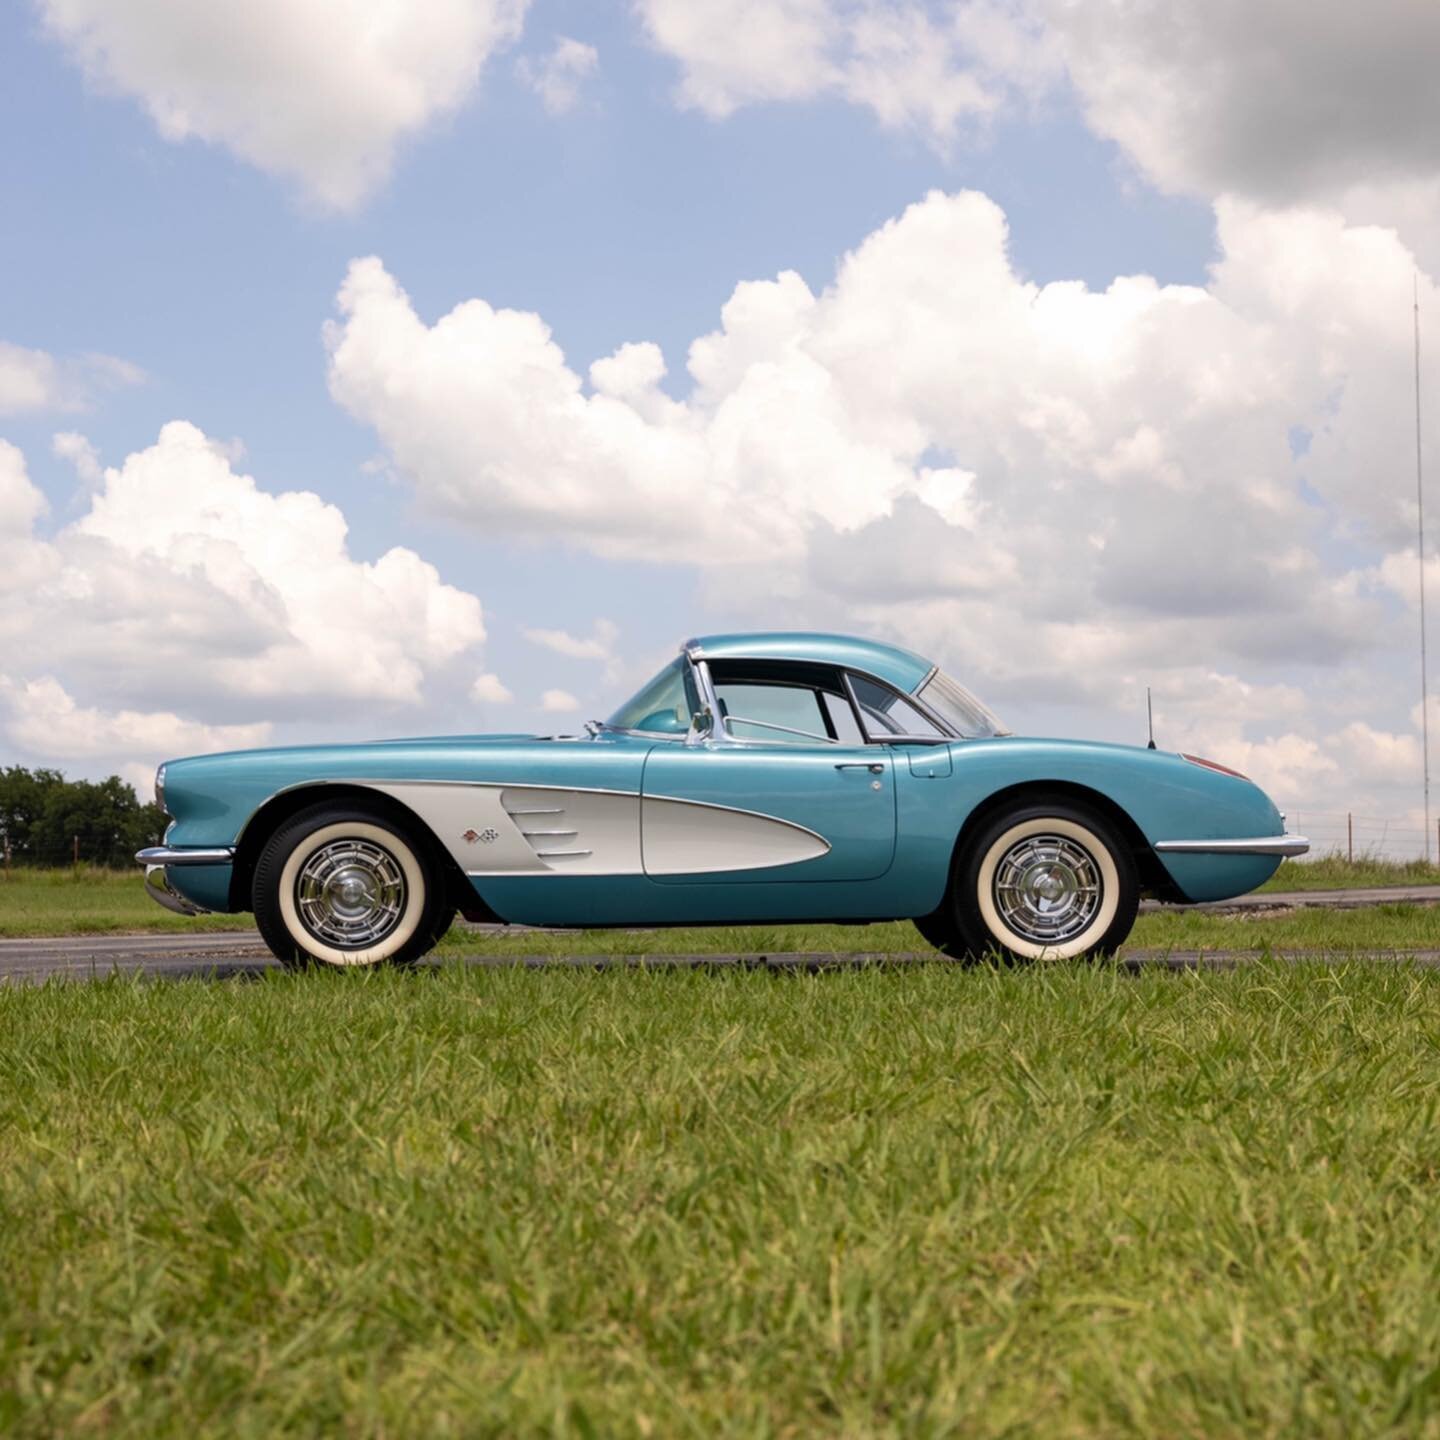 1959 Corvette cleaned up for a personal collector. This beauty was ALL ORIGINAL! 54.1 miles on the odo. This was a special slice of history that I will always remember. 

#v #chevroletperformance #corvettemods #corvetteparts #americanmuscle #corvette